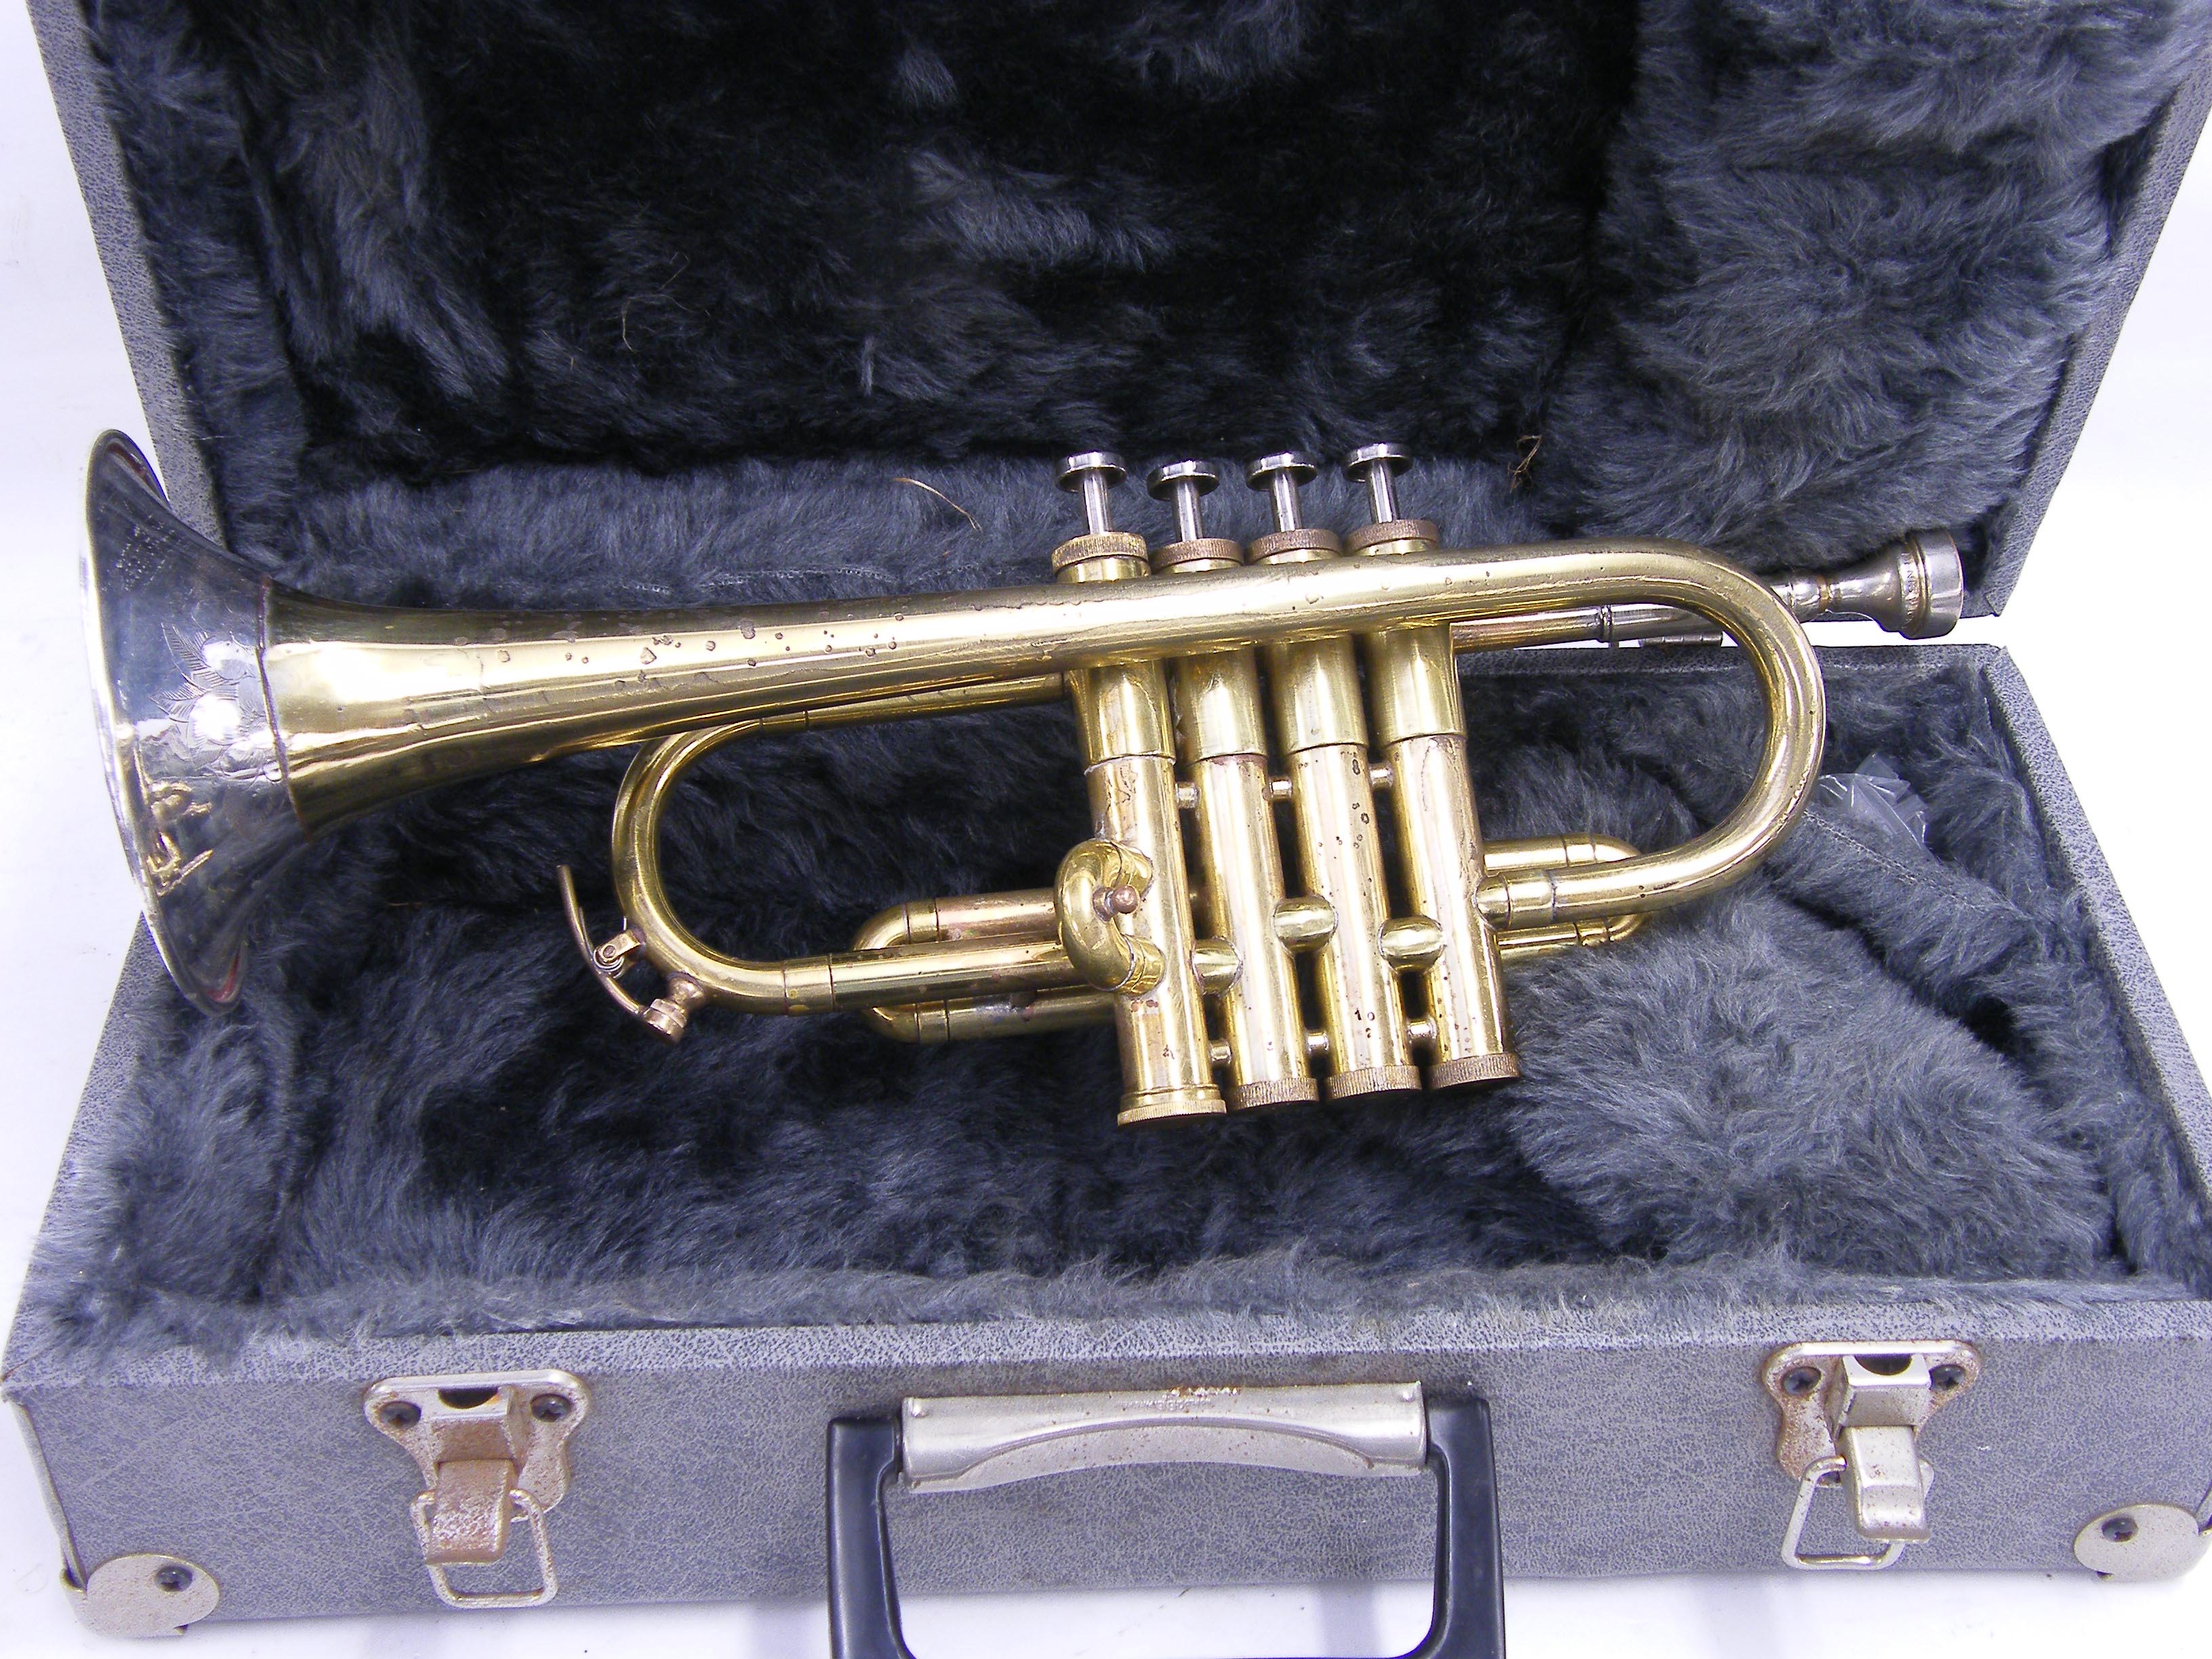 Unusual four valve E flat/D brass trumpet, made in England, possibly a prototype instrument, case